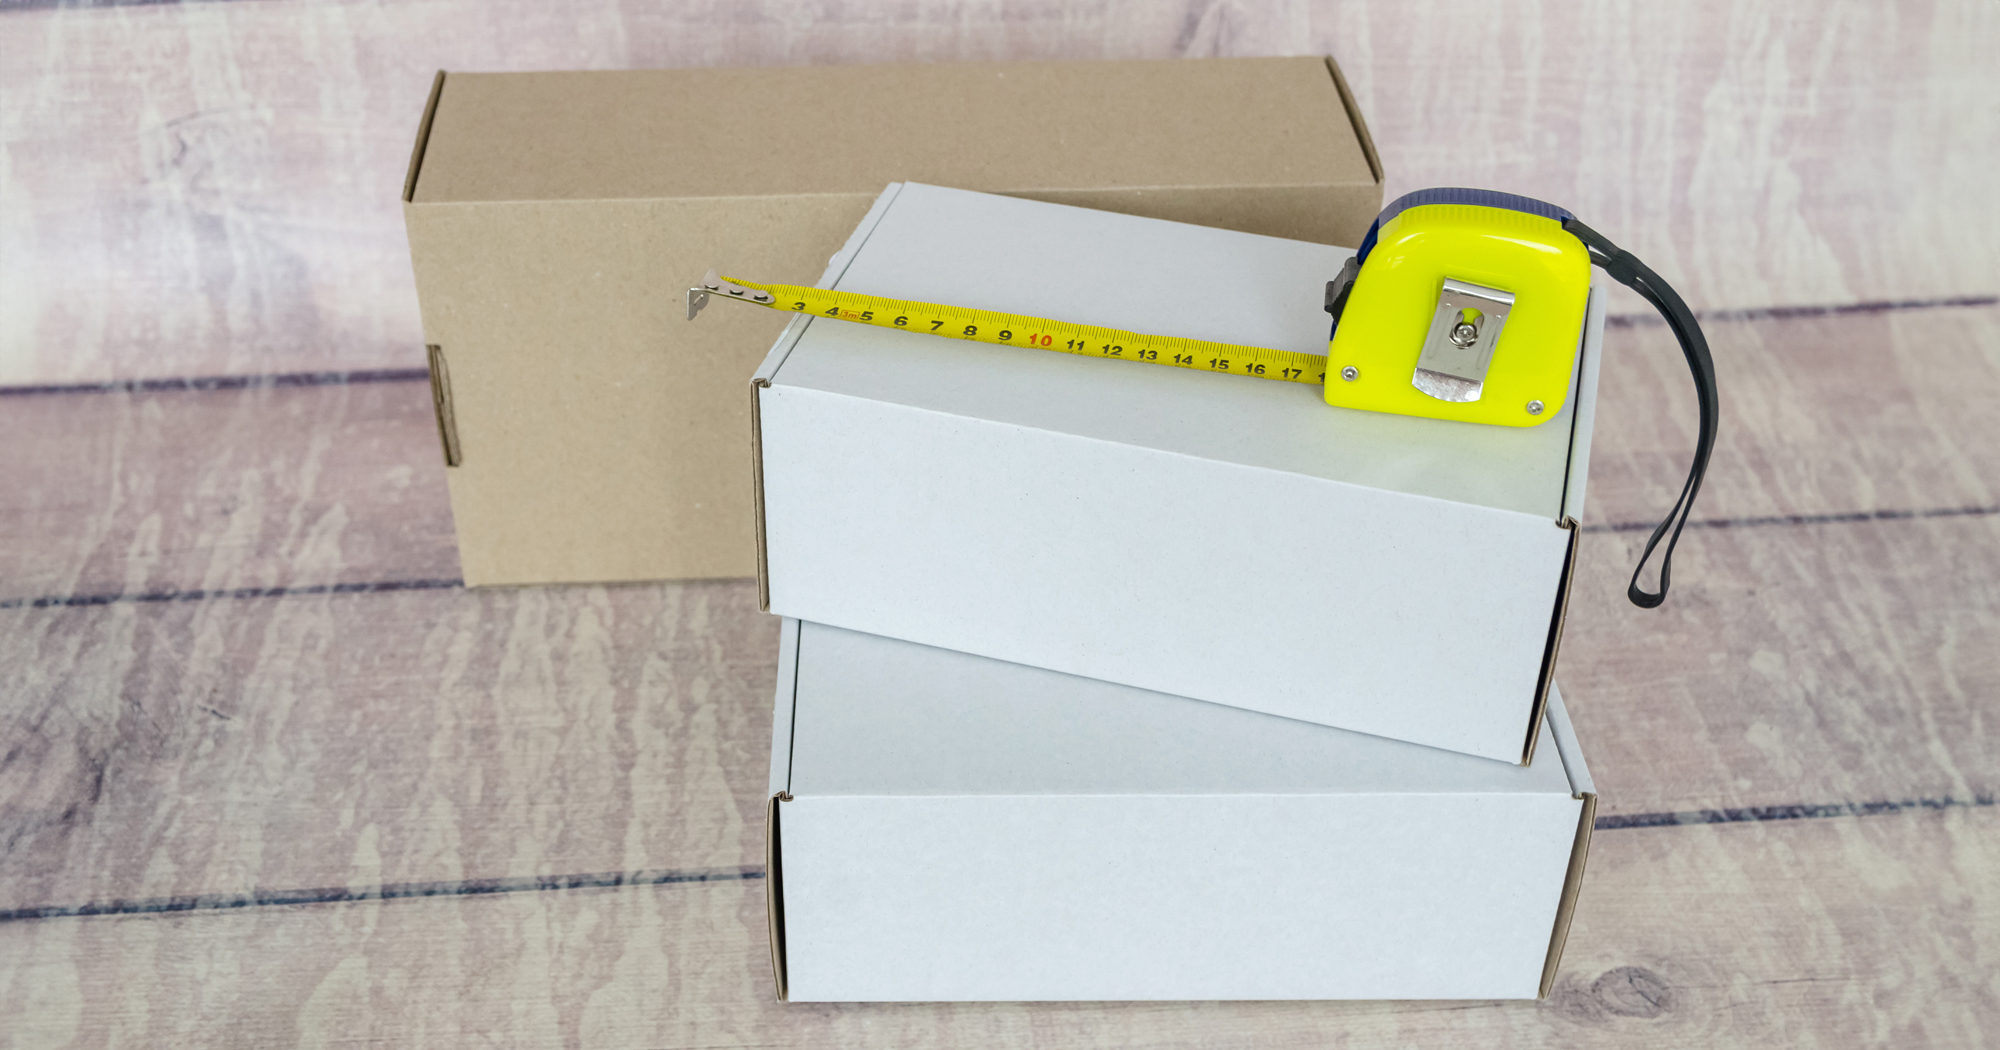 How to Measure Box Dimensions for Folding Cartons